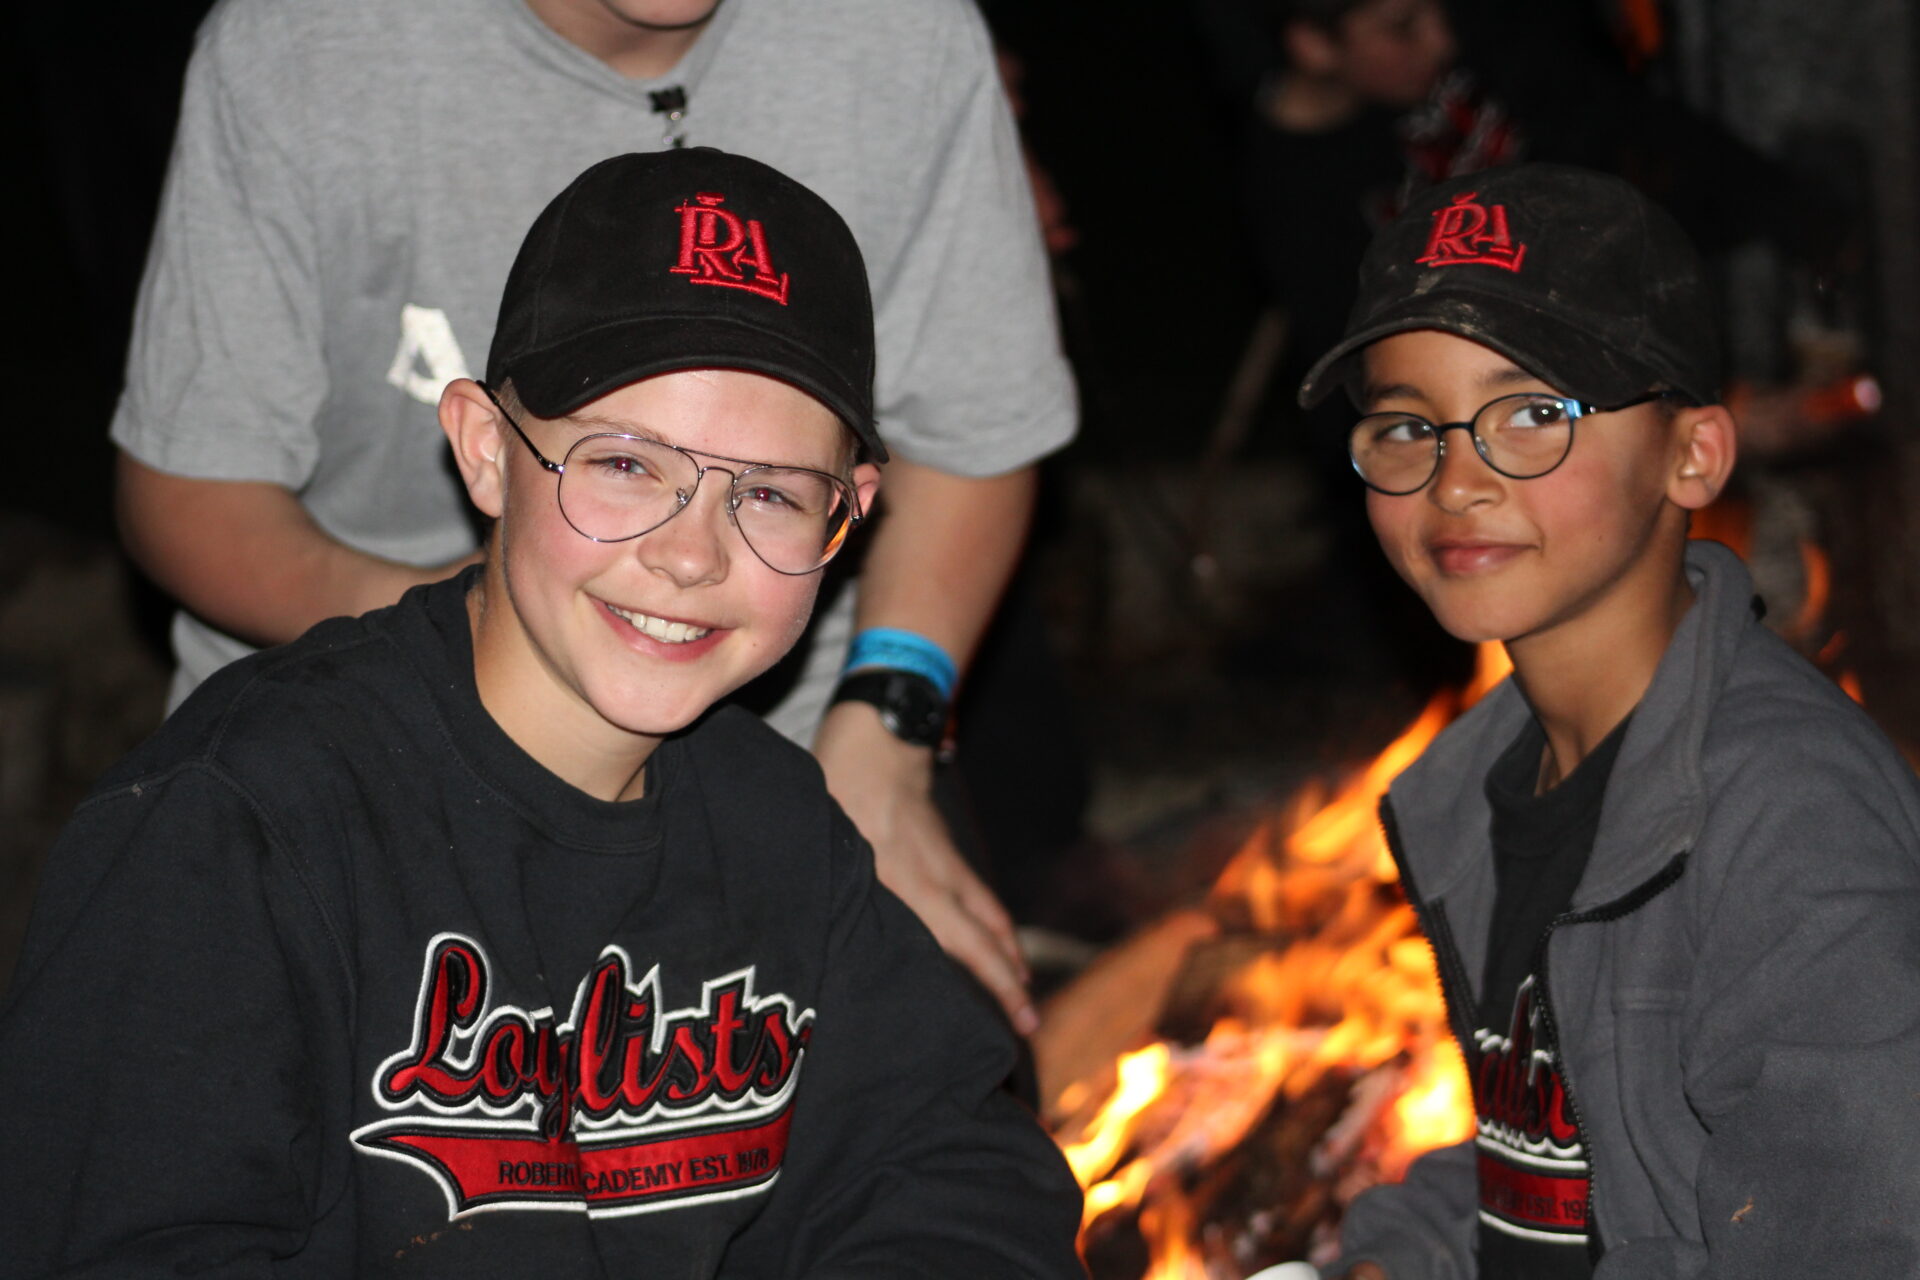 Students siting by the campfire